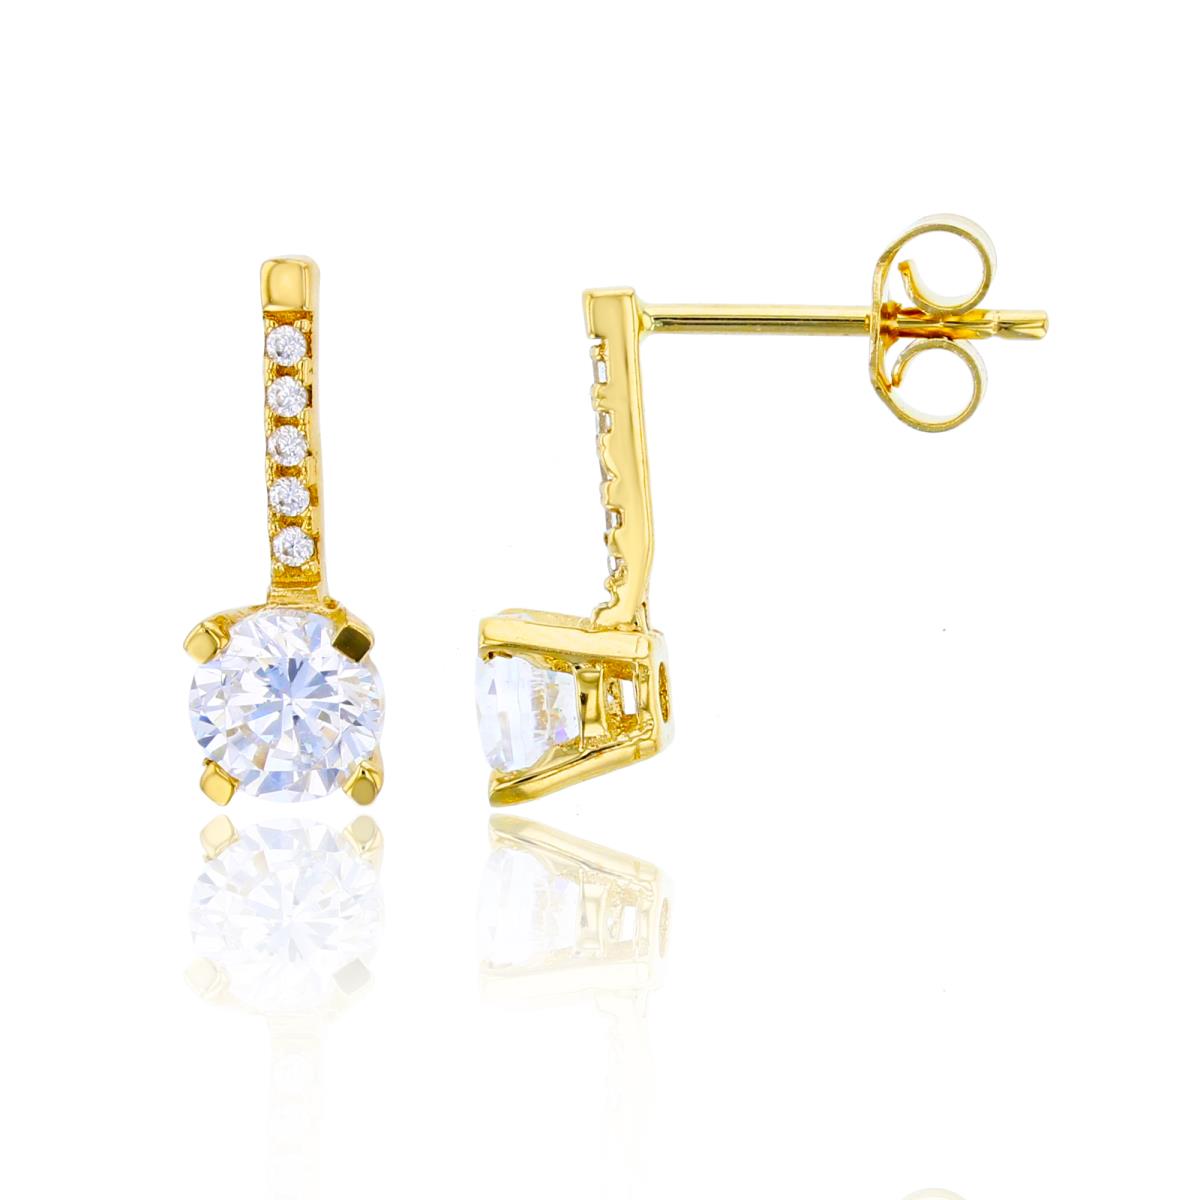 10K Yellow Gold 5.25mm Rnd CZ Solitaire Earring